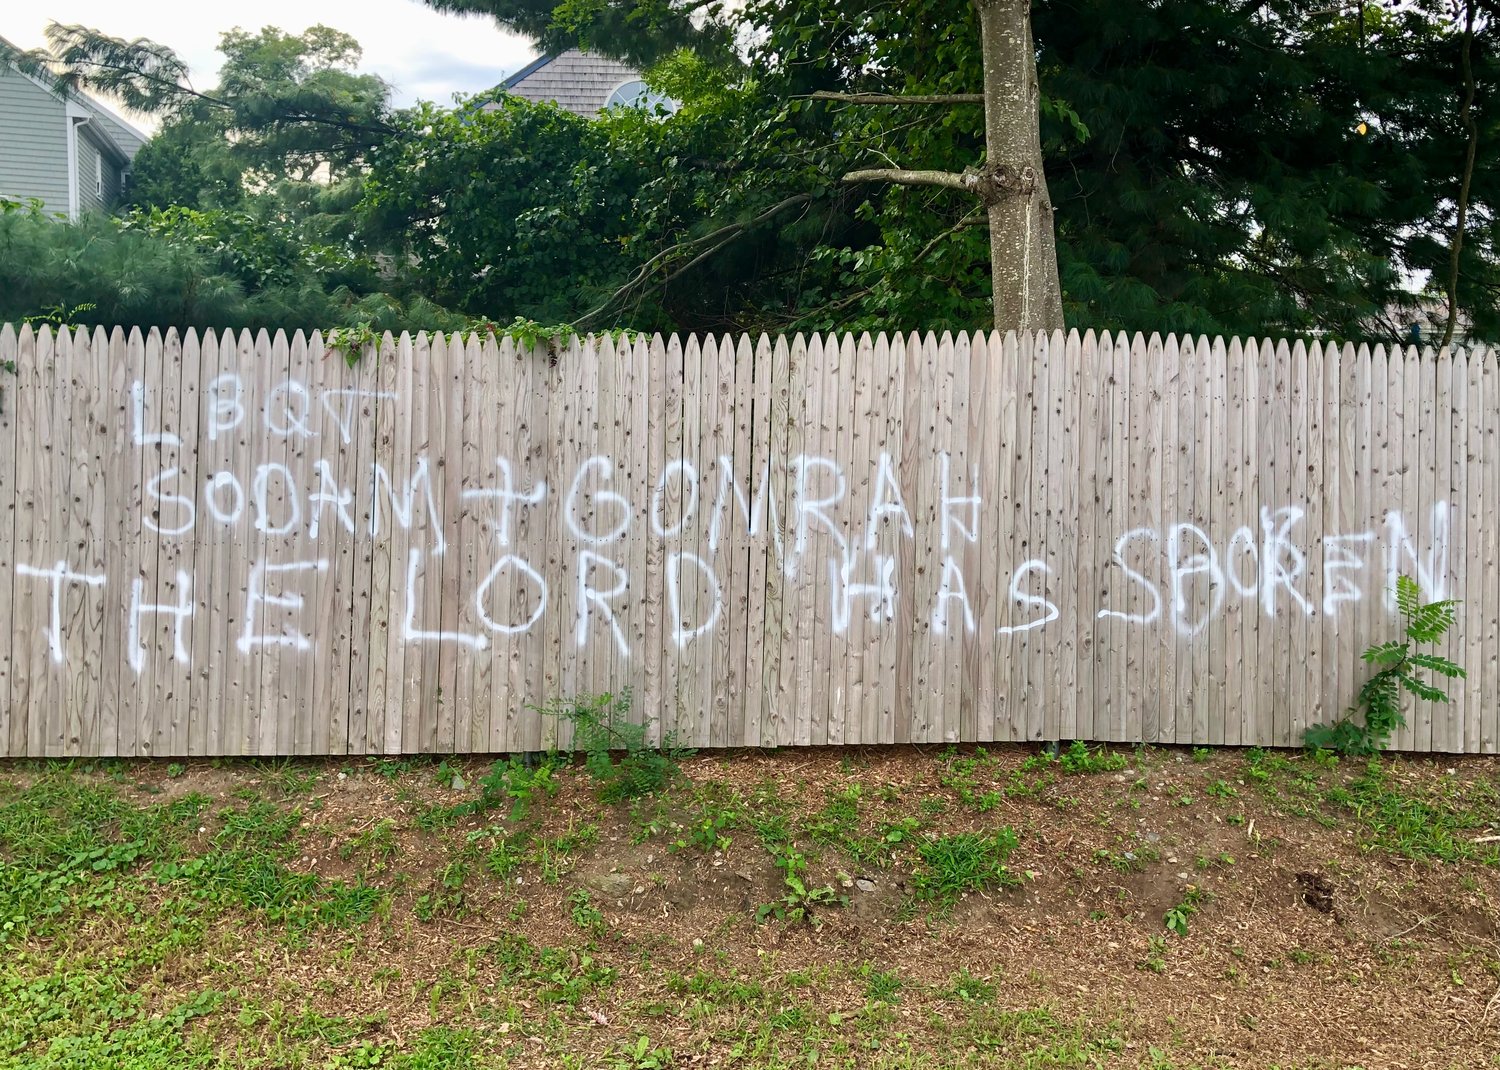 An example of the graffiti that appeared on a fence outside the CFP Arts, Wellness, and Community Center on Sunday, just hours before the Portsmouth Democratic Town Committee’s annual fund-raiser there.